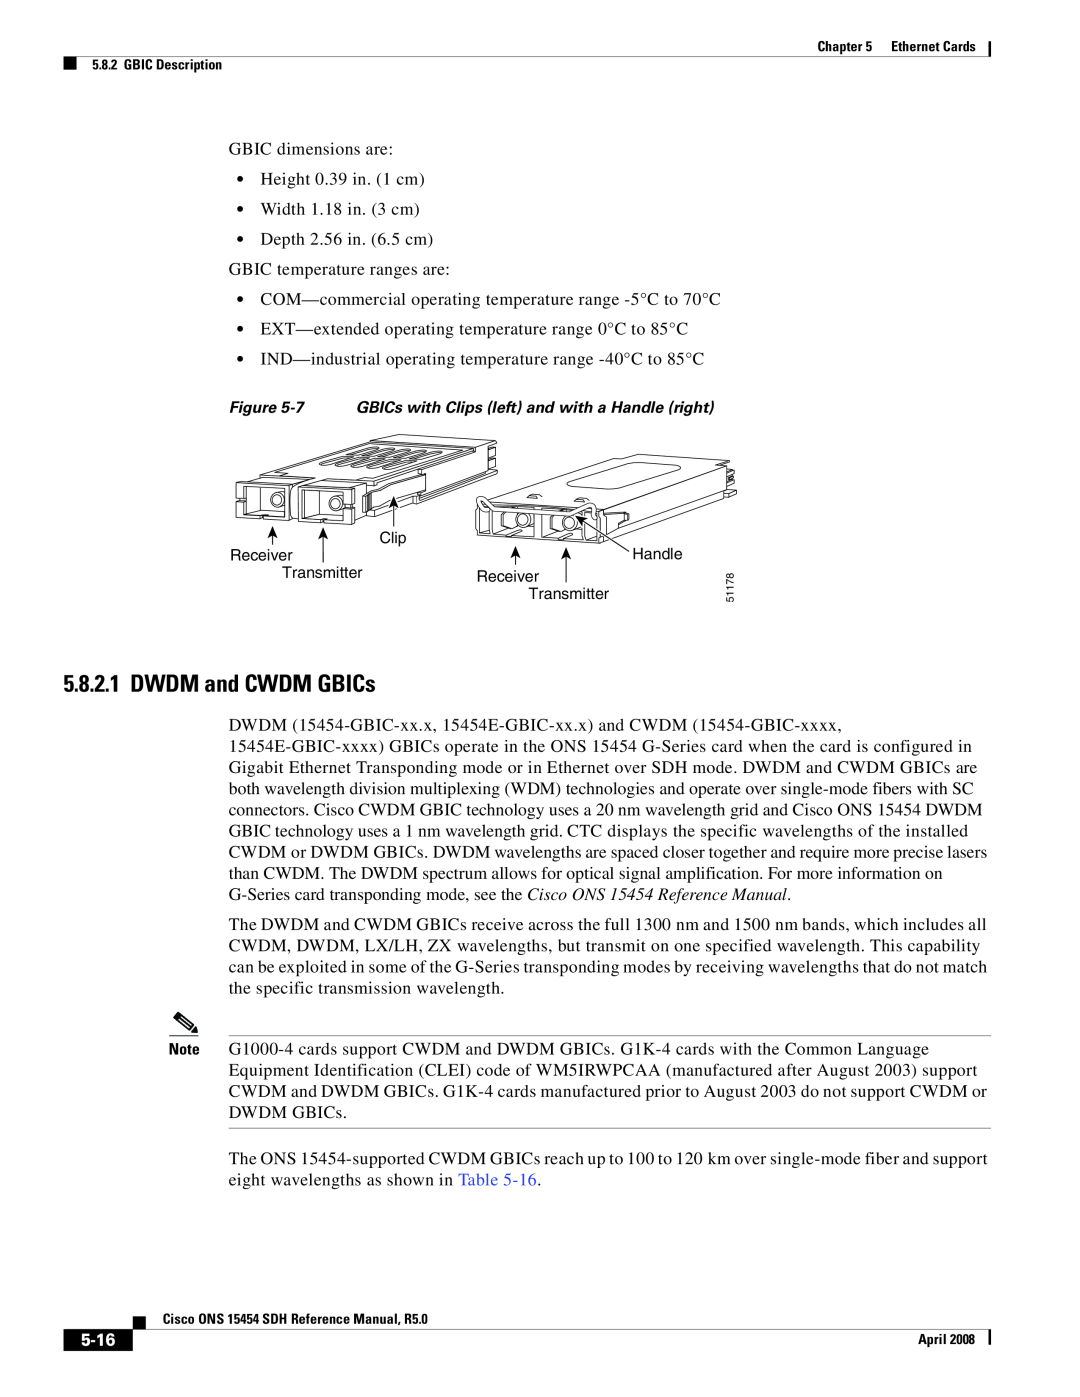 Cisco Systems ONS 15454 SDH specifications 5-16, DWDM and CWDM GBICs 